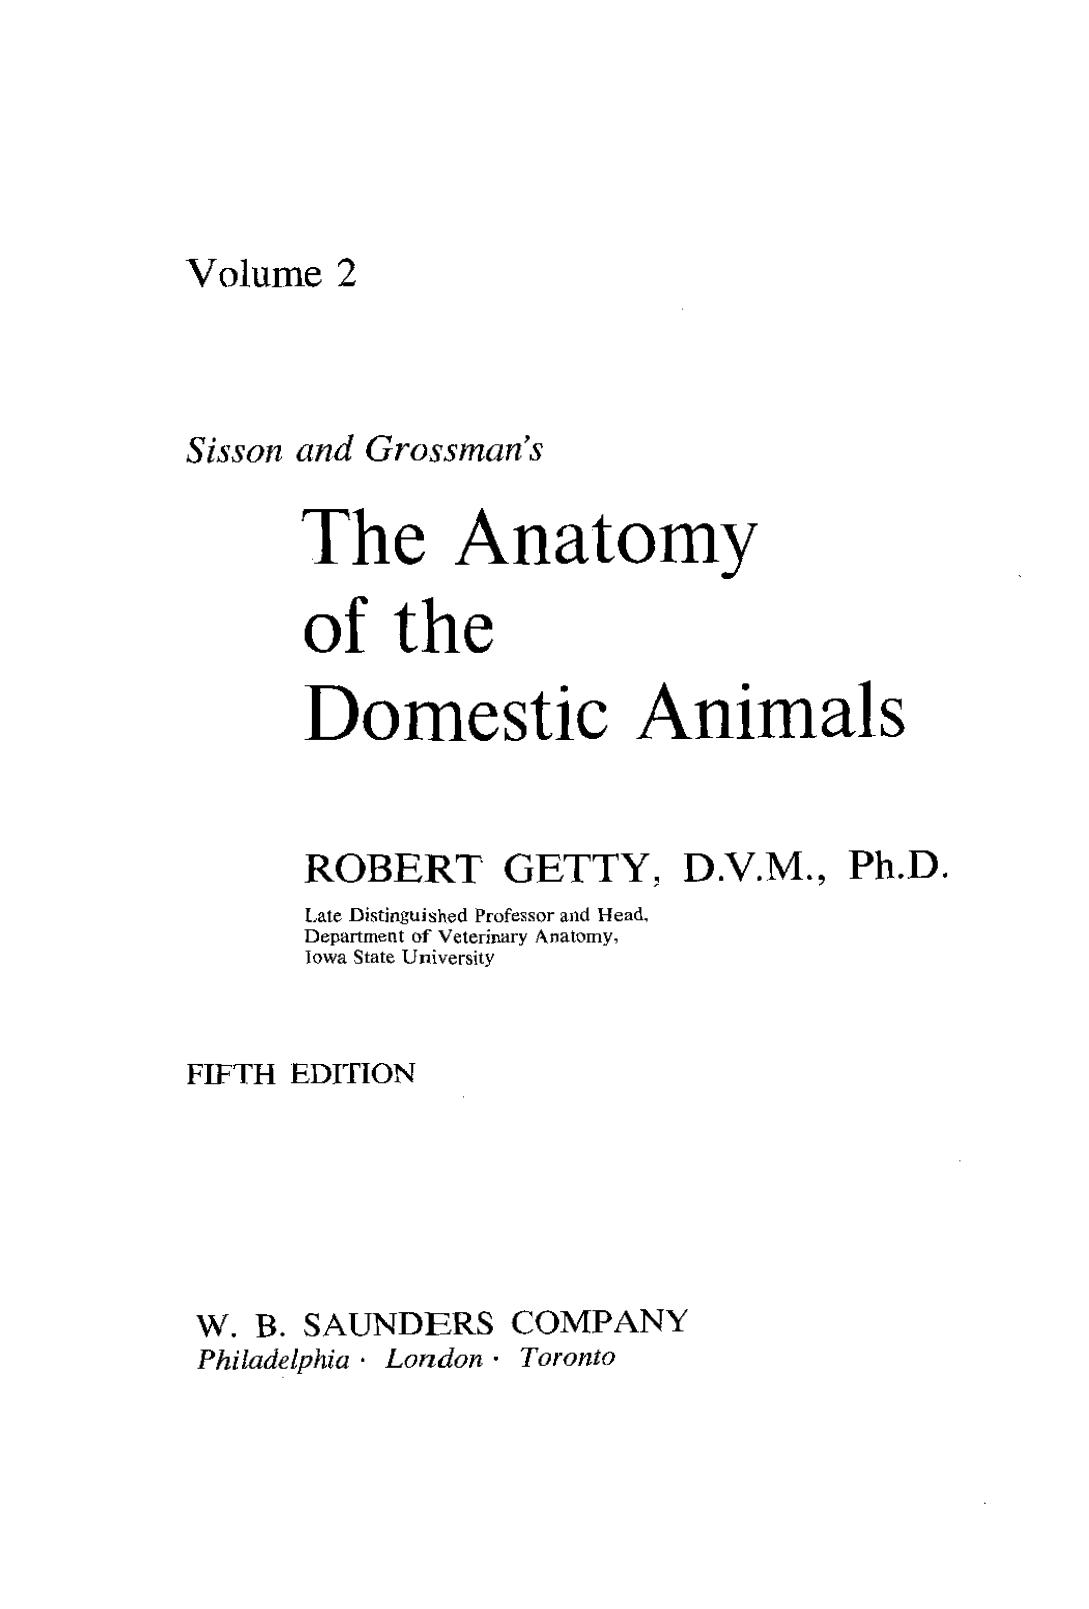 Sisson and Grossmans The Anatomy of Domestic Animals 5th Edition 1975